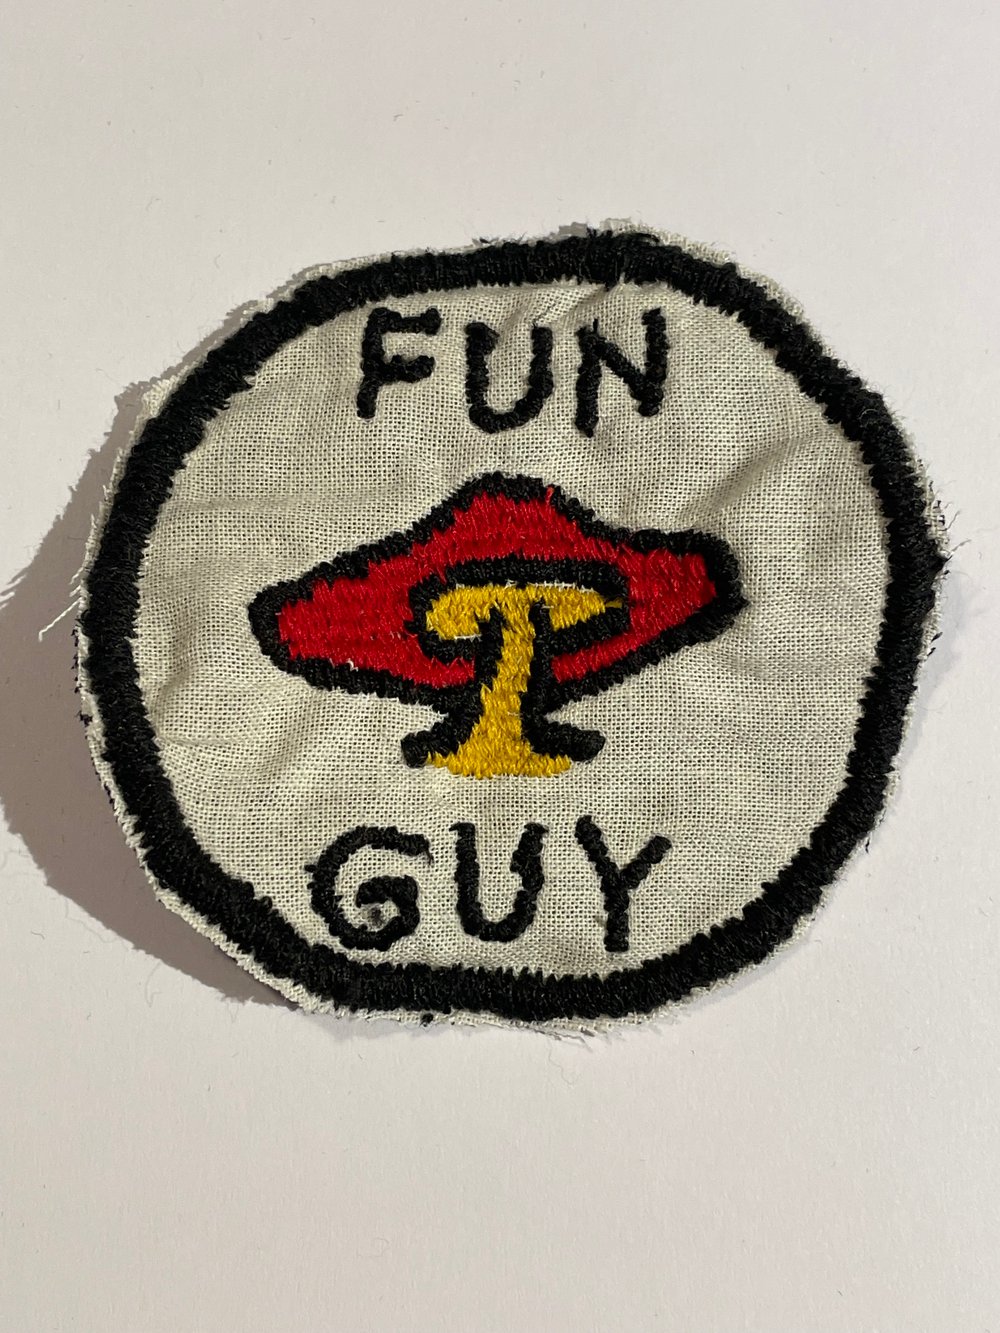 Image of Fun Guy patch.